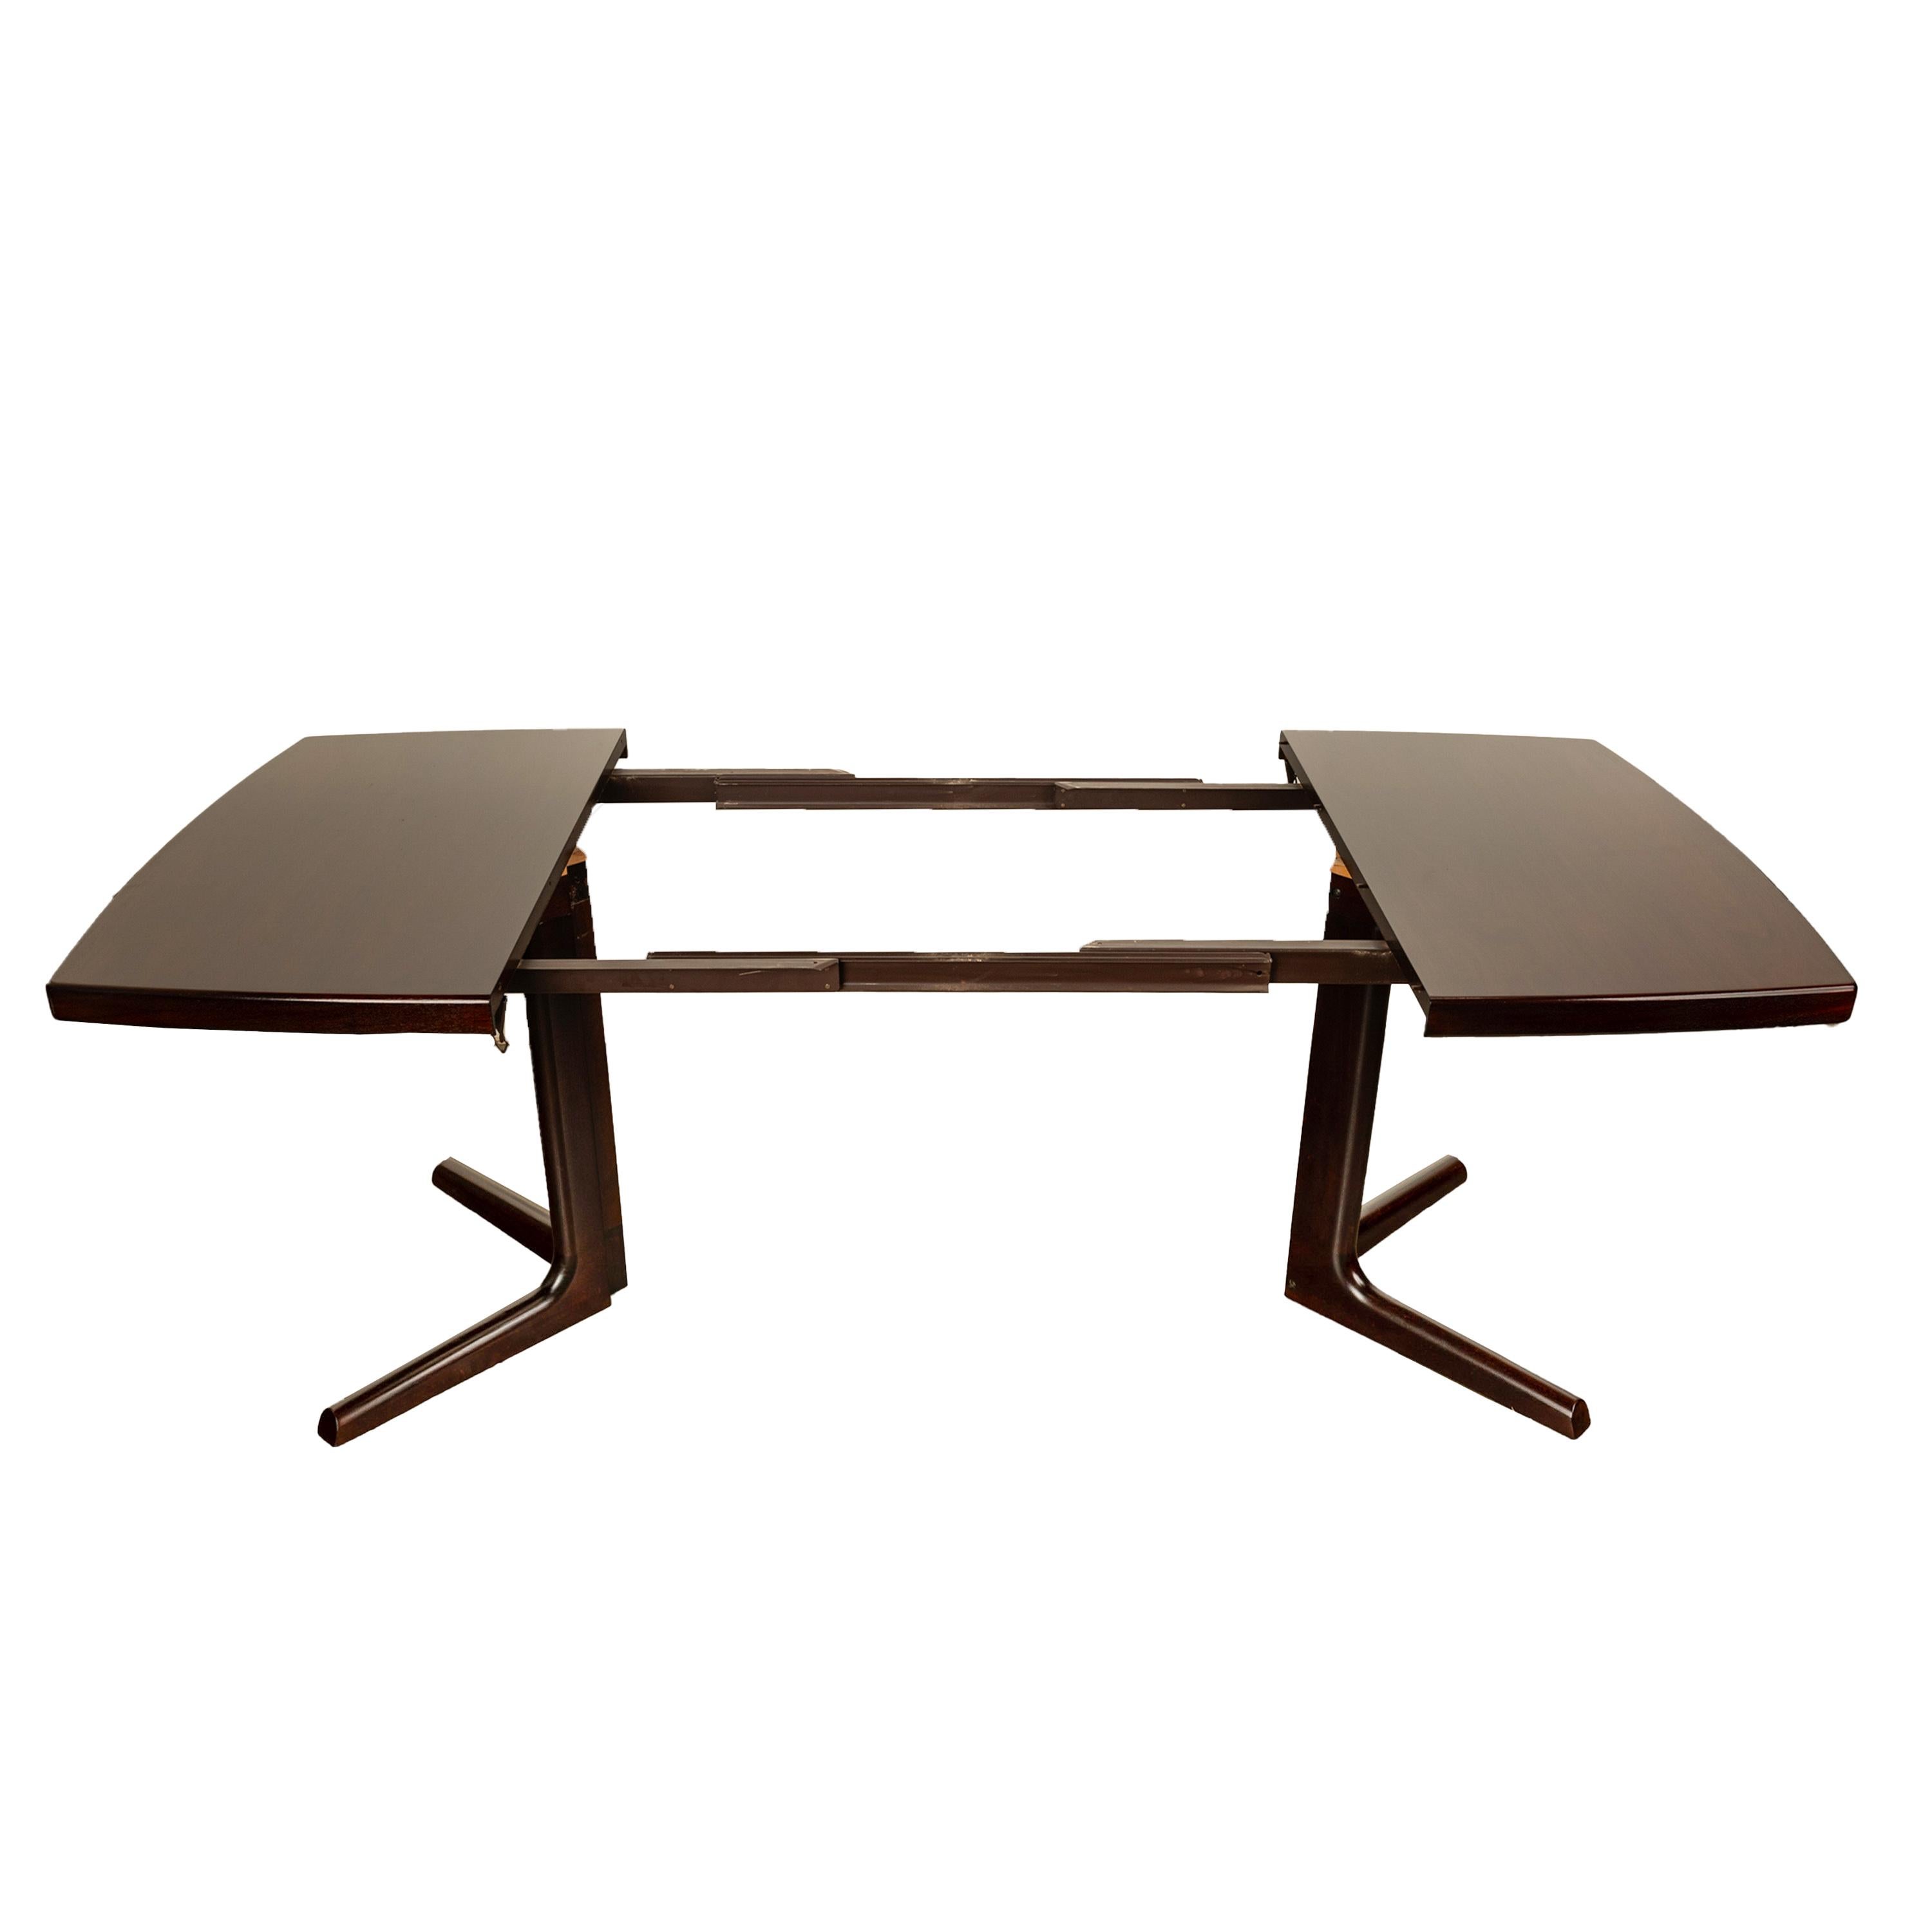 Mid Century Modern Danish Rosewood Dining Table Seats 8-10 Farstrup Mobler 1965 For Sale 6